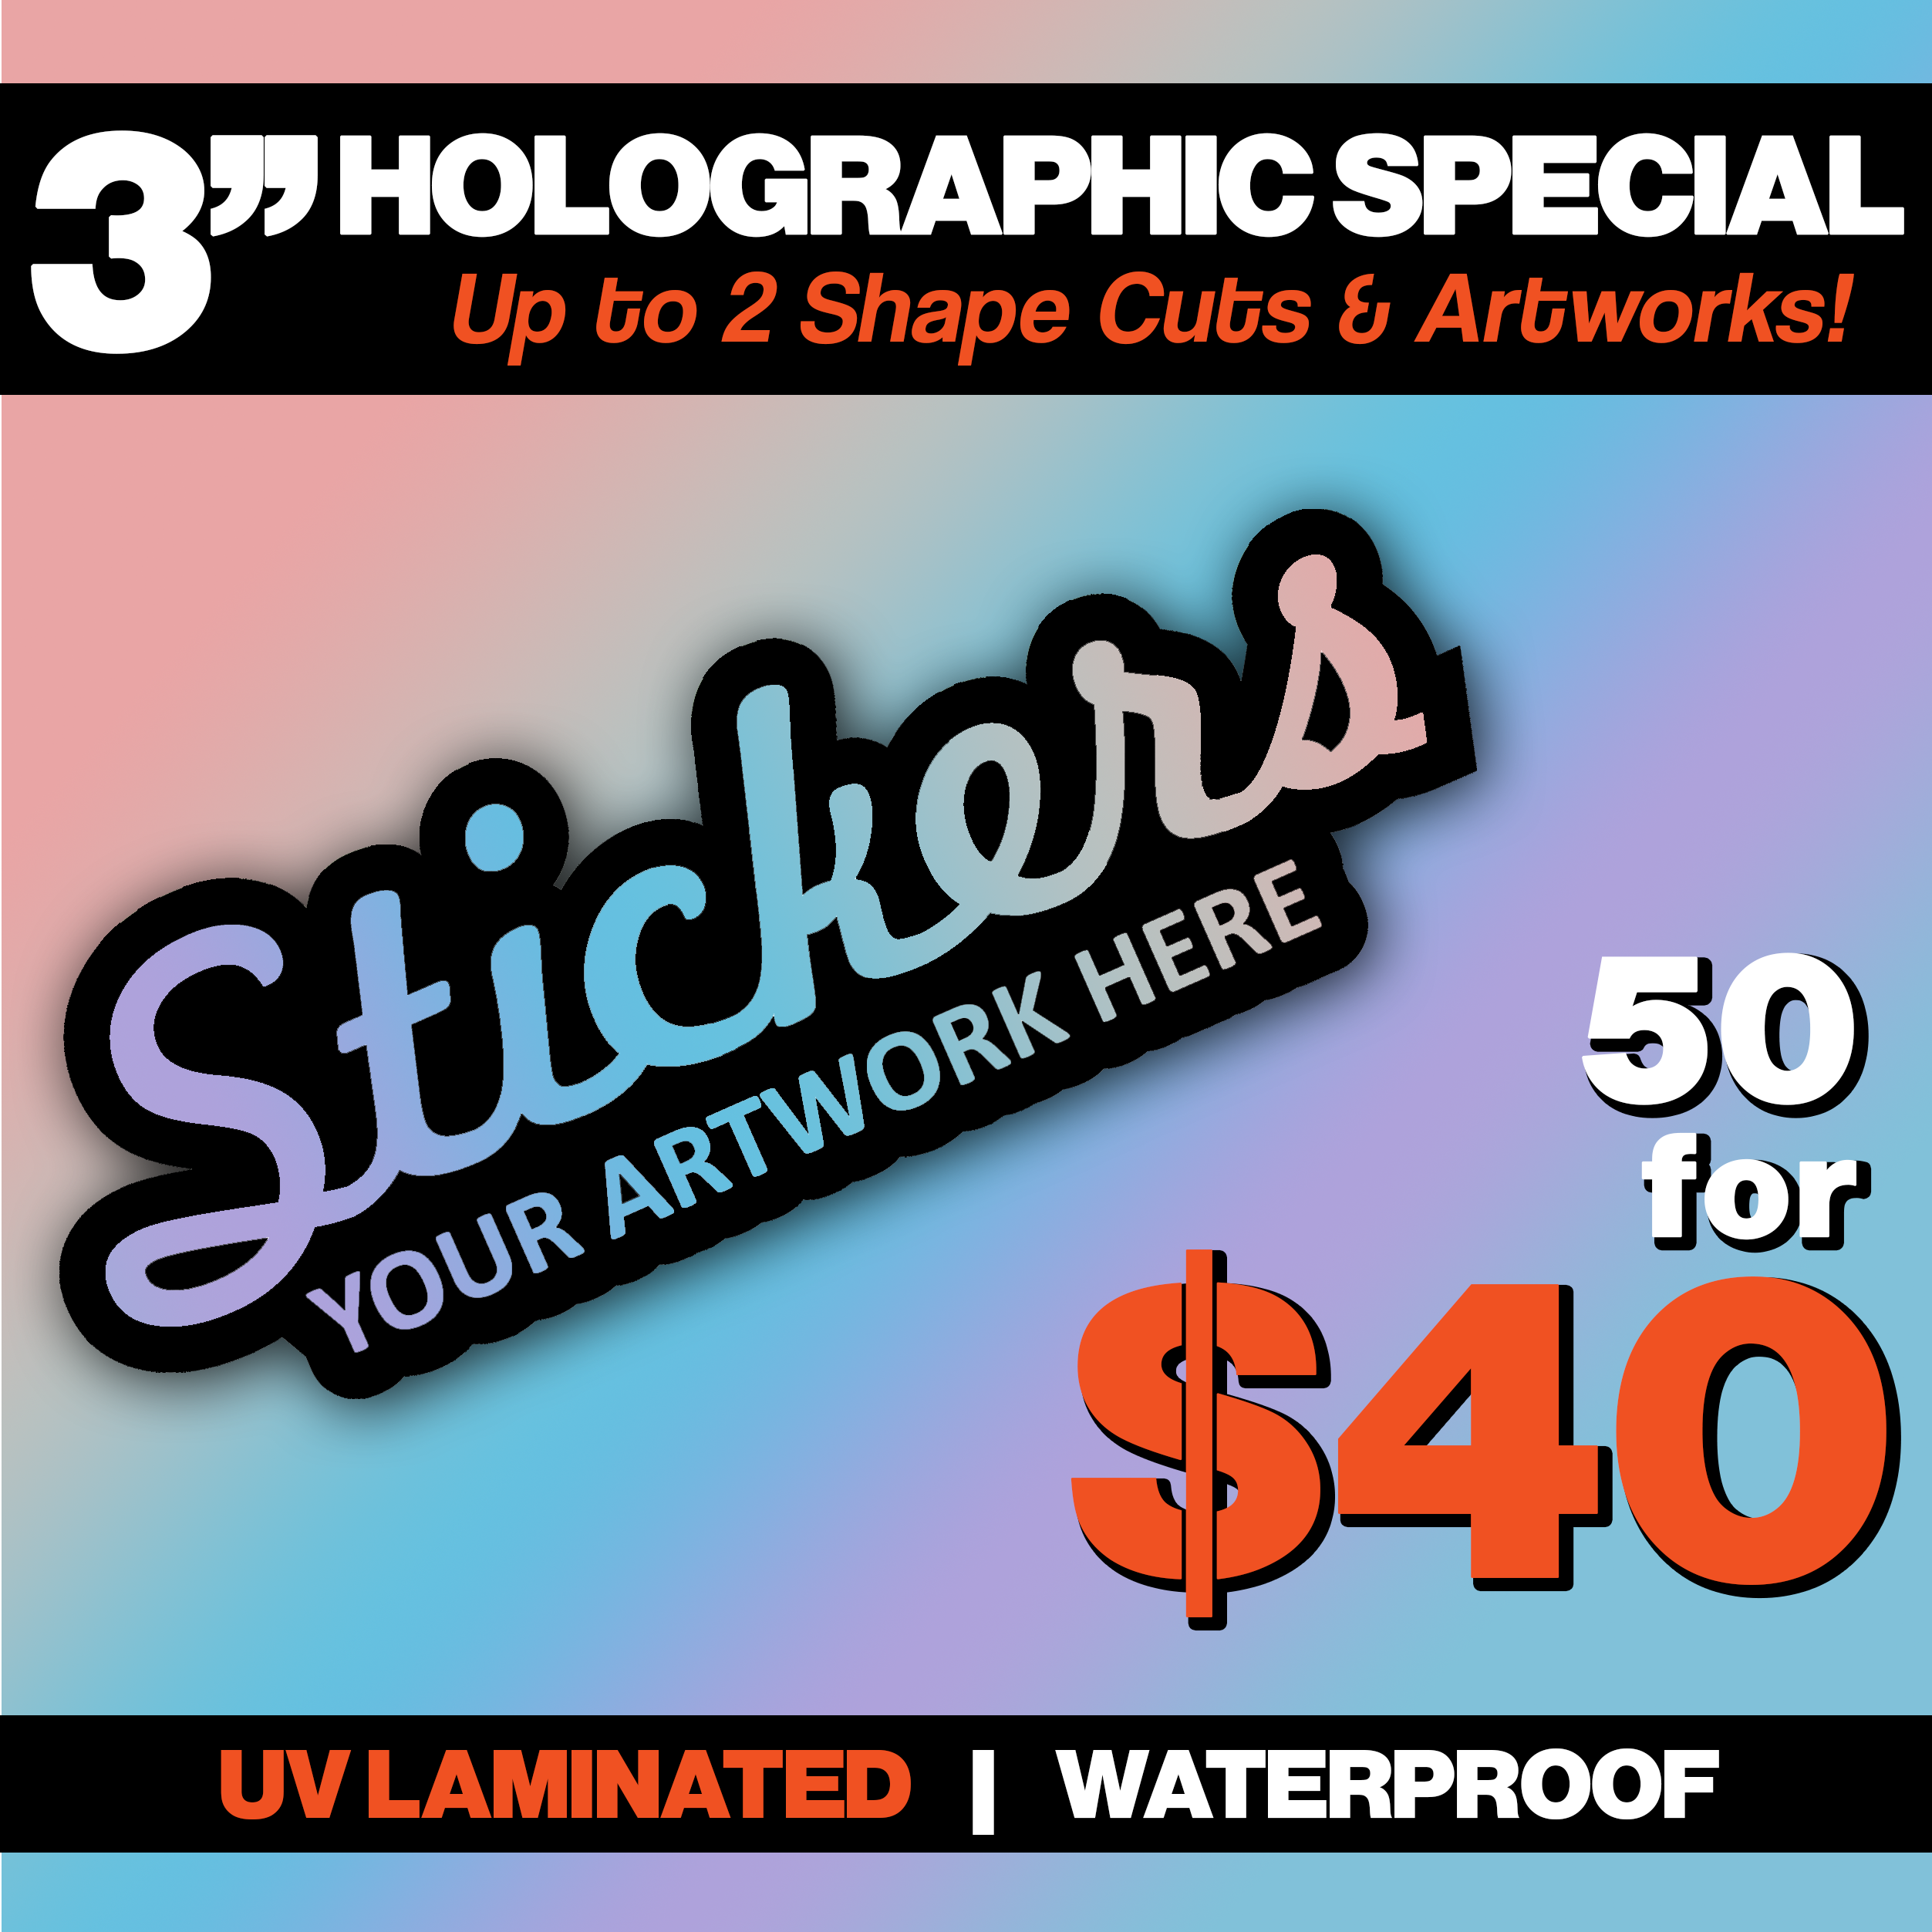 50 - 3" Holographic Sticker Special